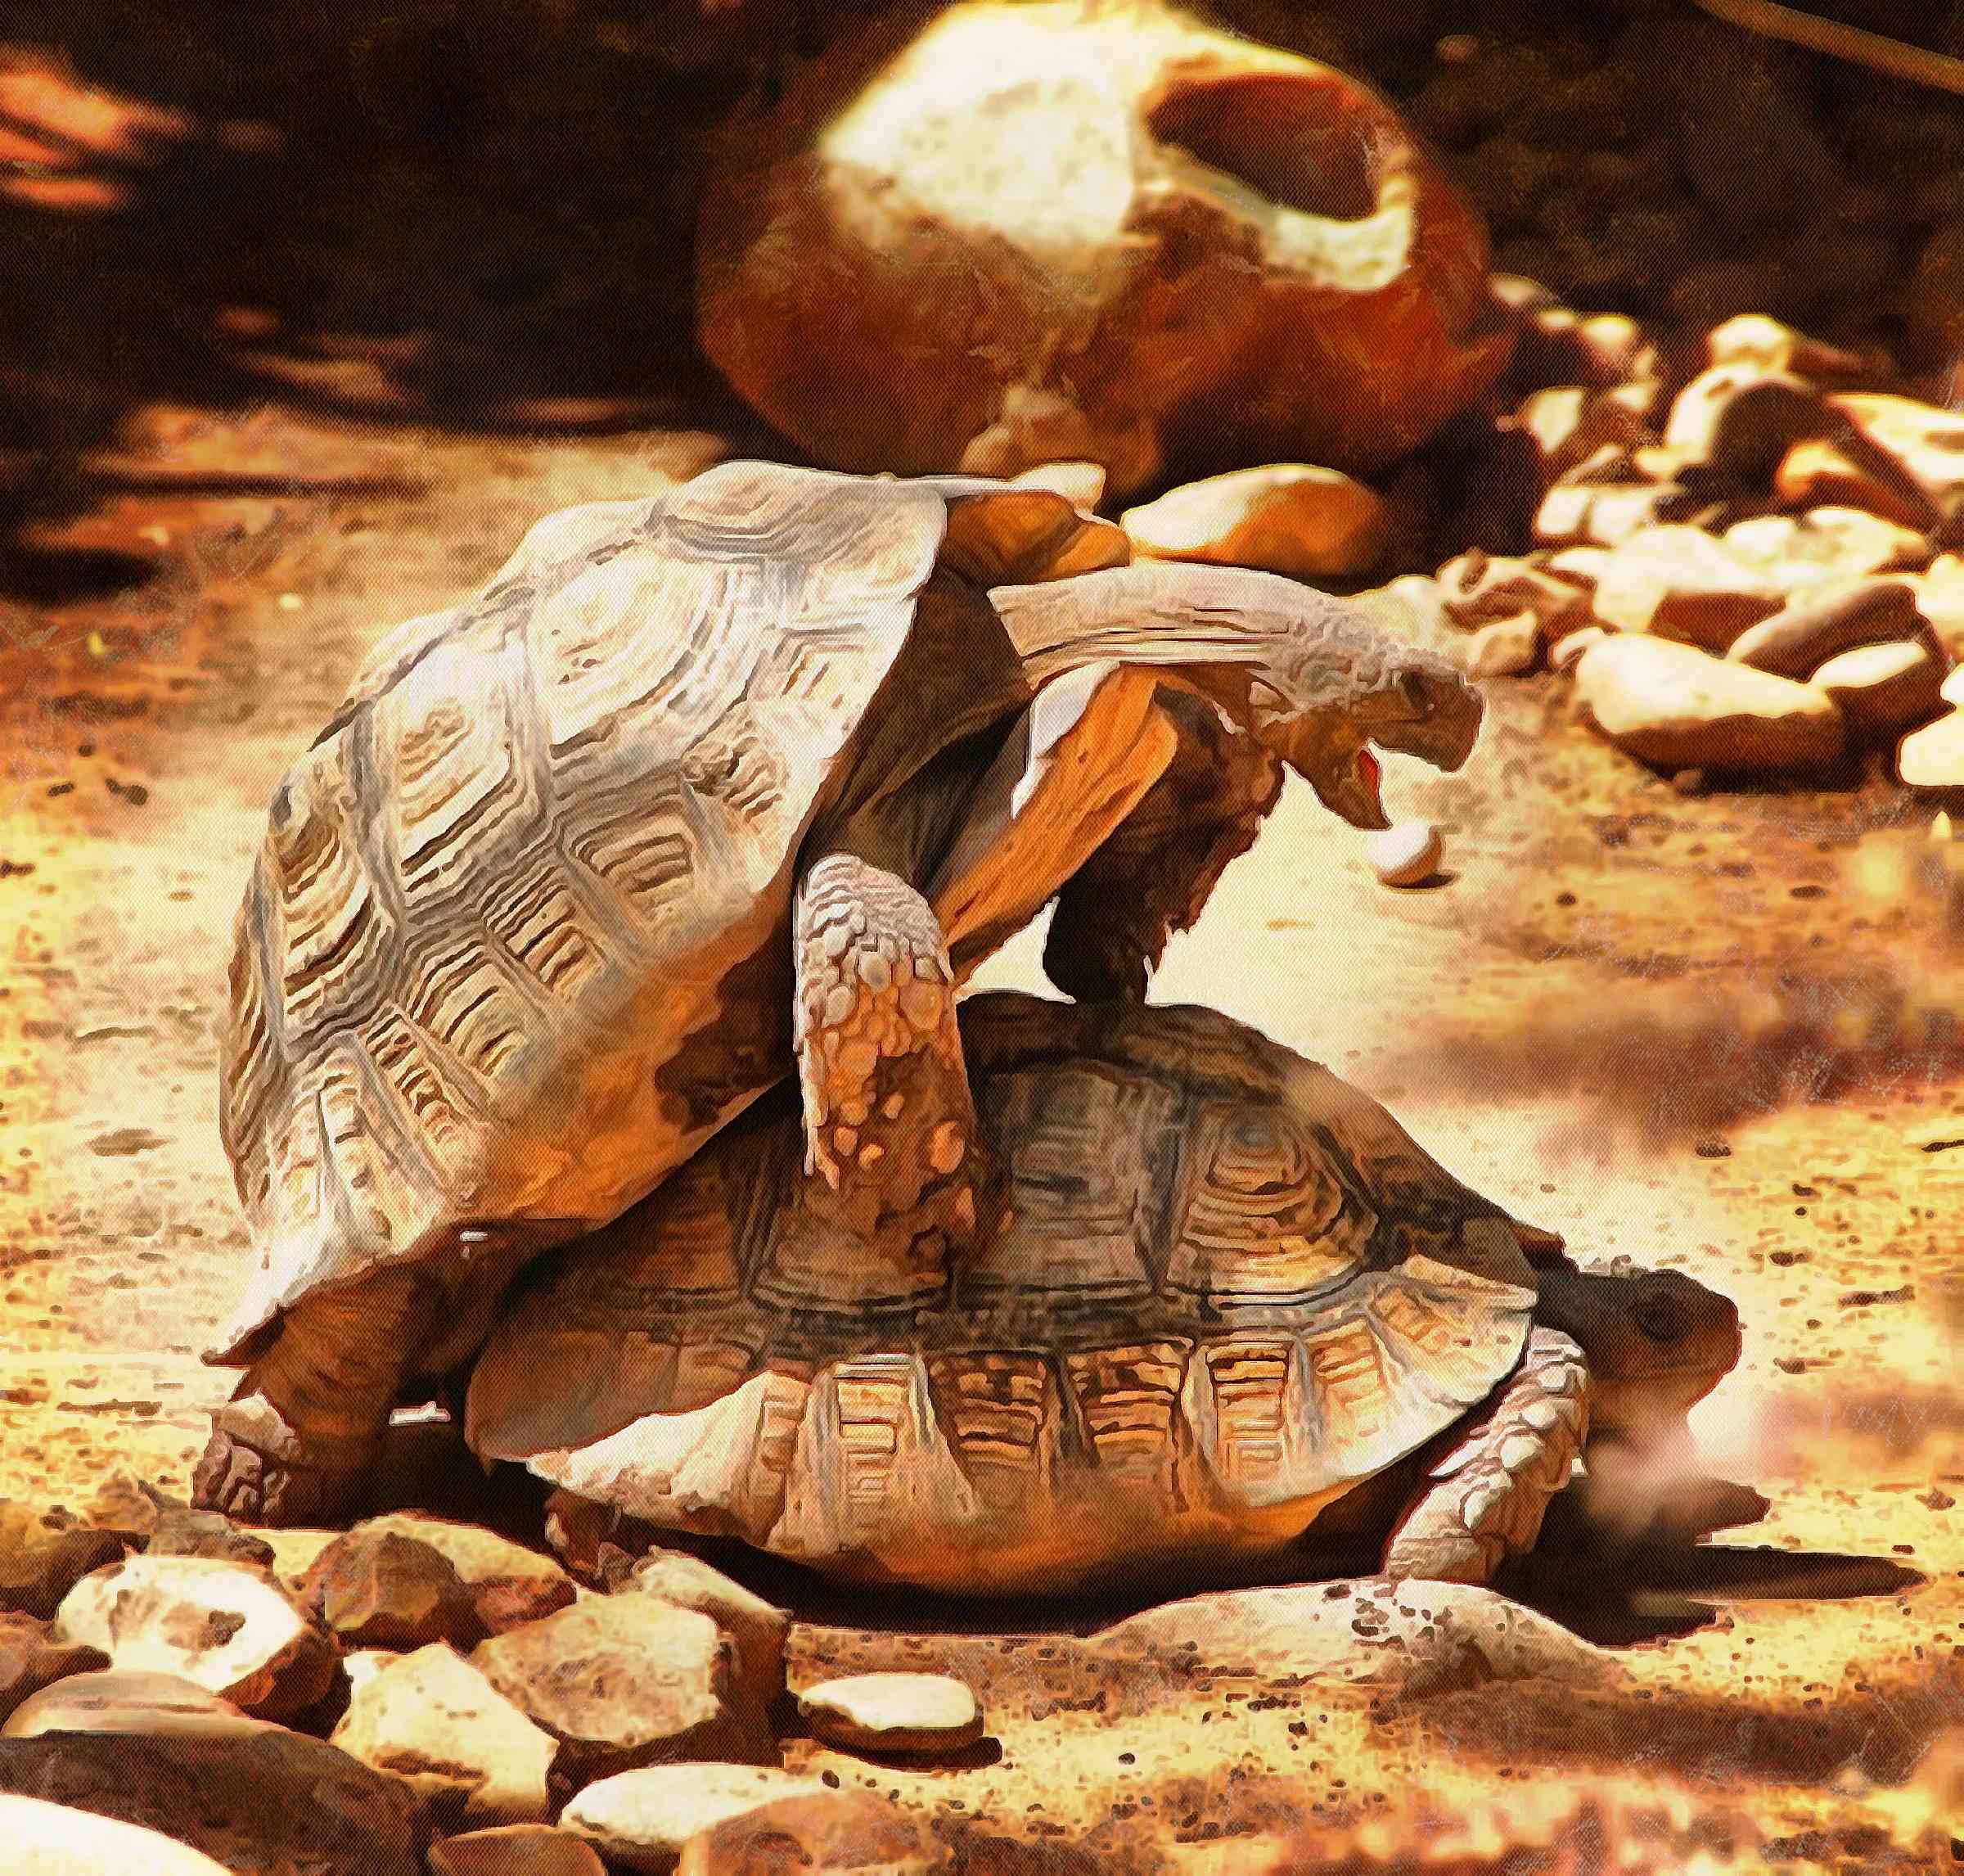 Free Tortoise images, Turtle free images,  – Turtle public domain images, Tortoise free , Turtle stock free images, free images turtles, tortoise public domain images!